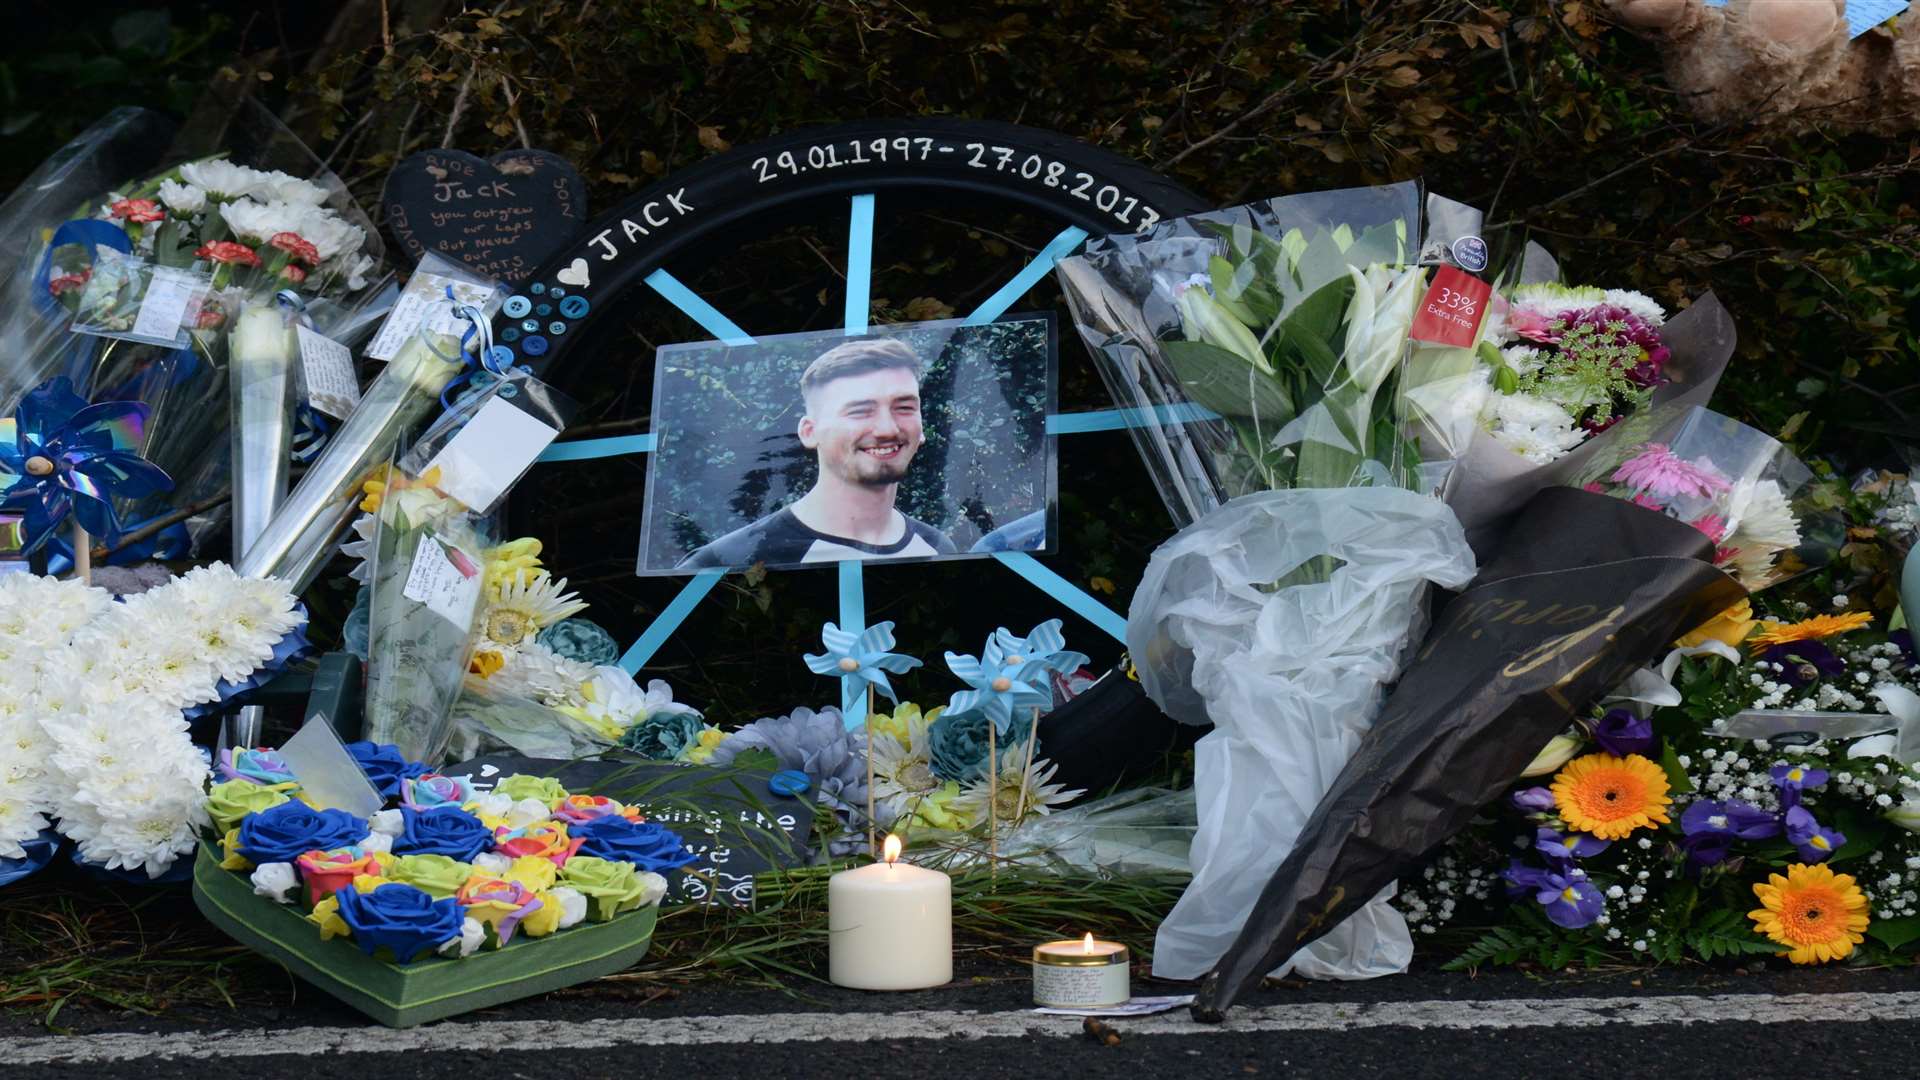 Floral tributes for Jack Whichello